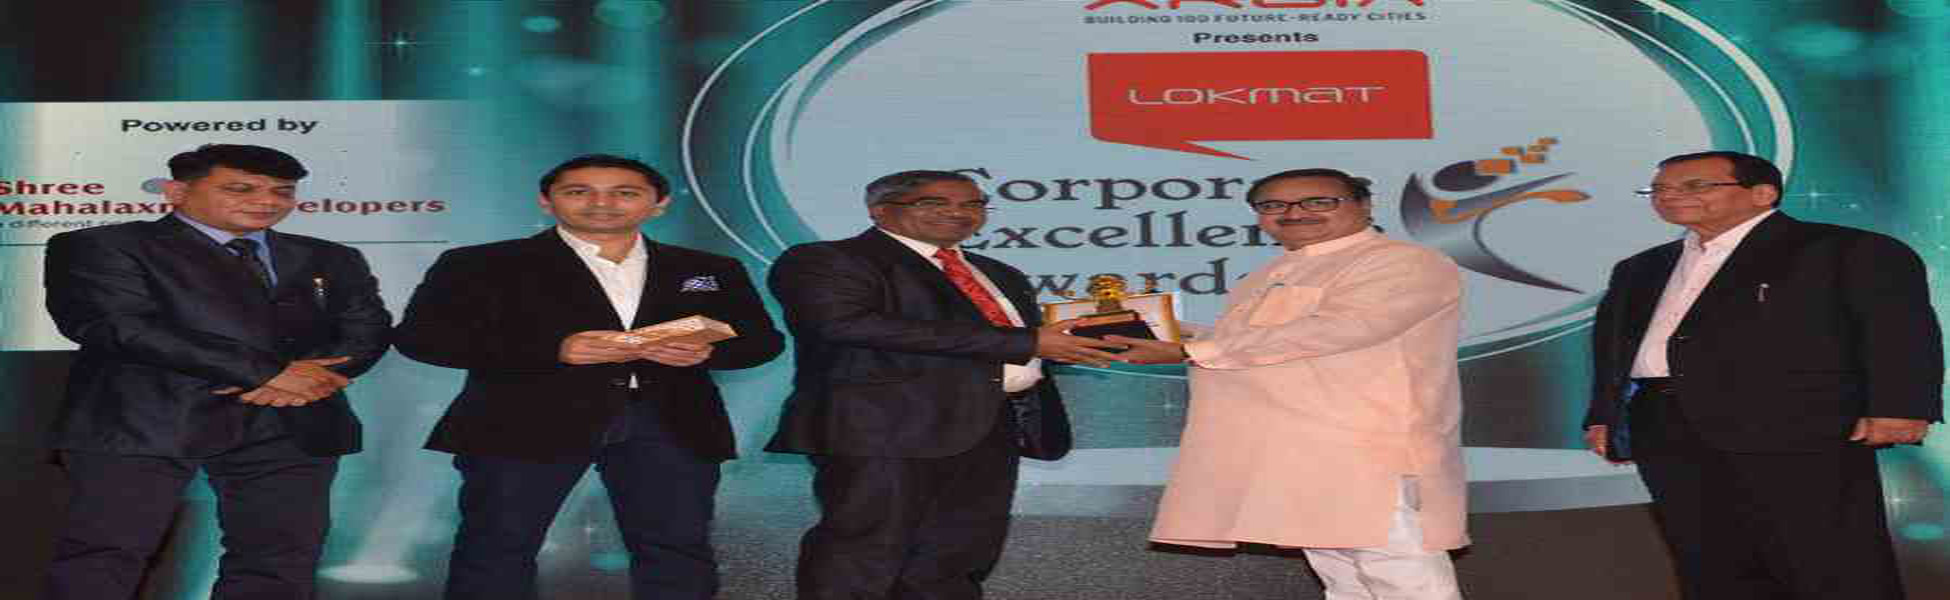 Lokmat Corporate Excellence Award